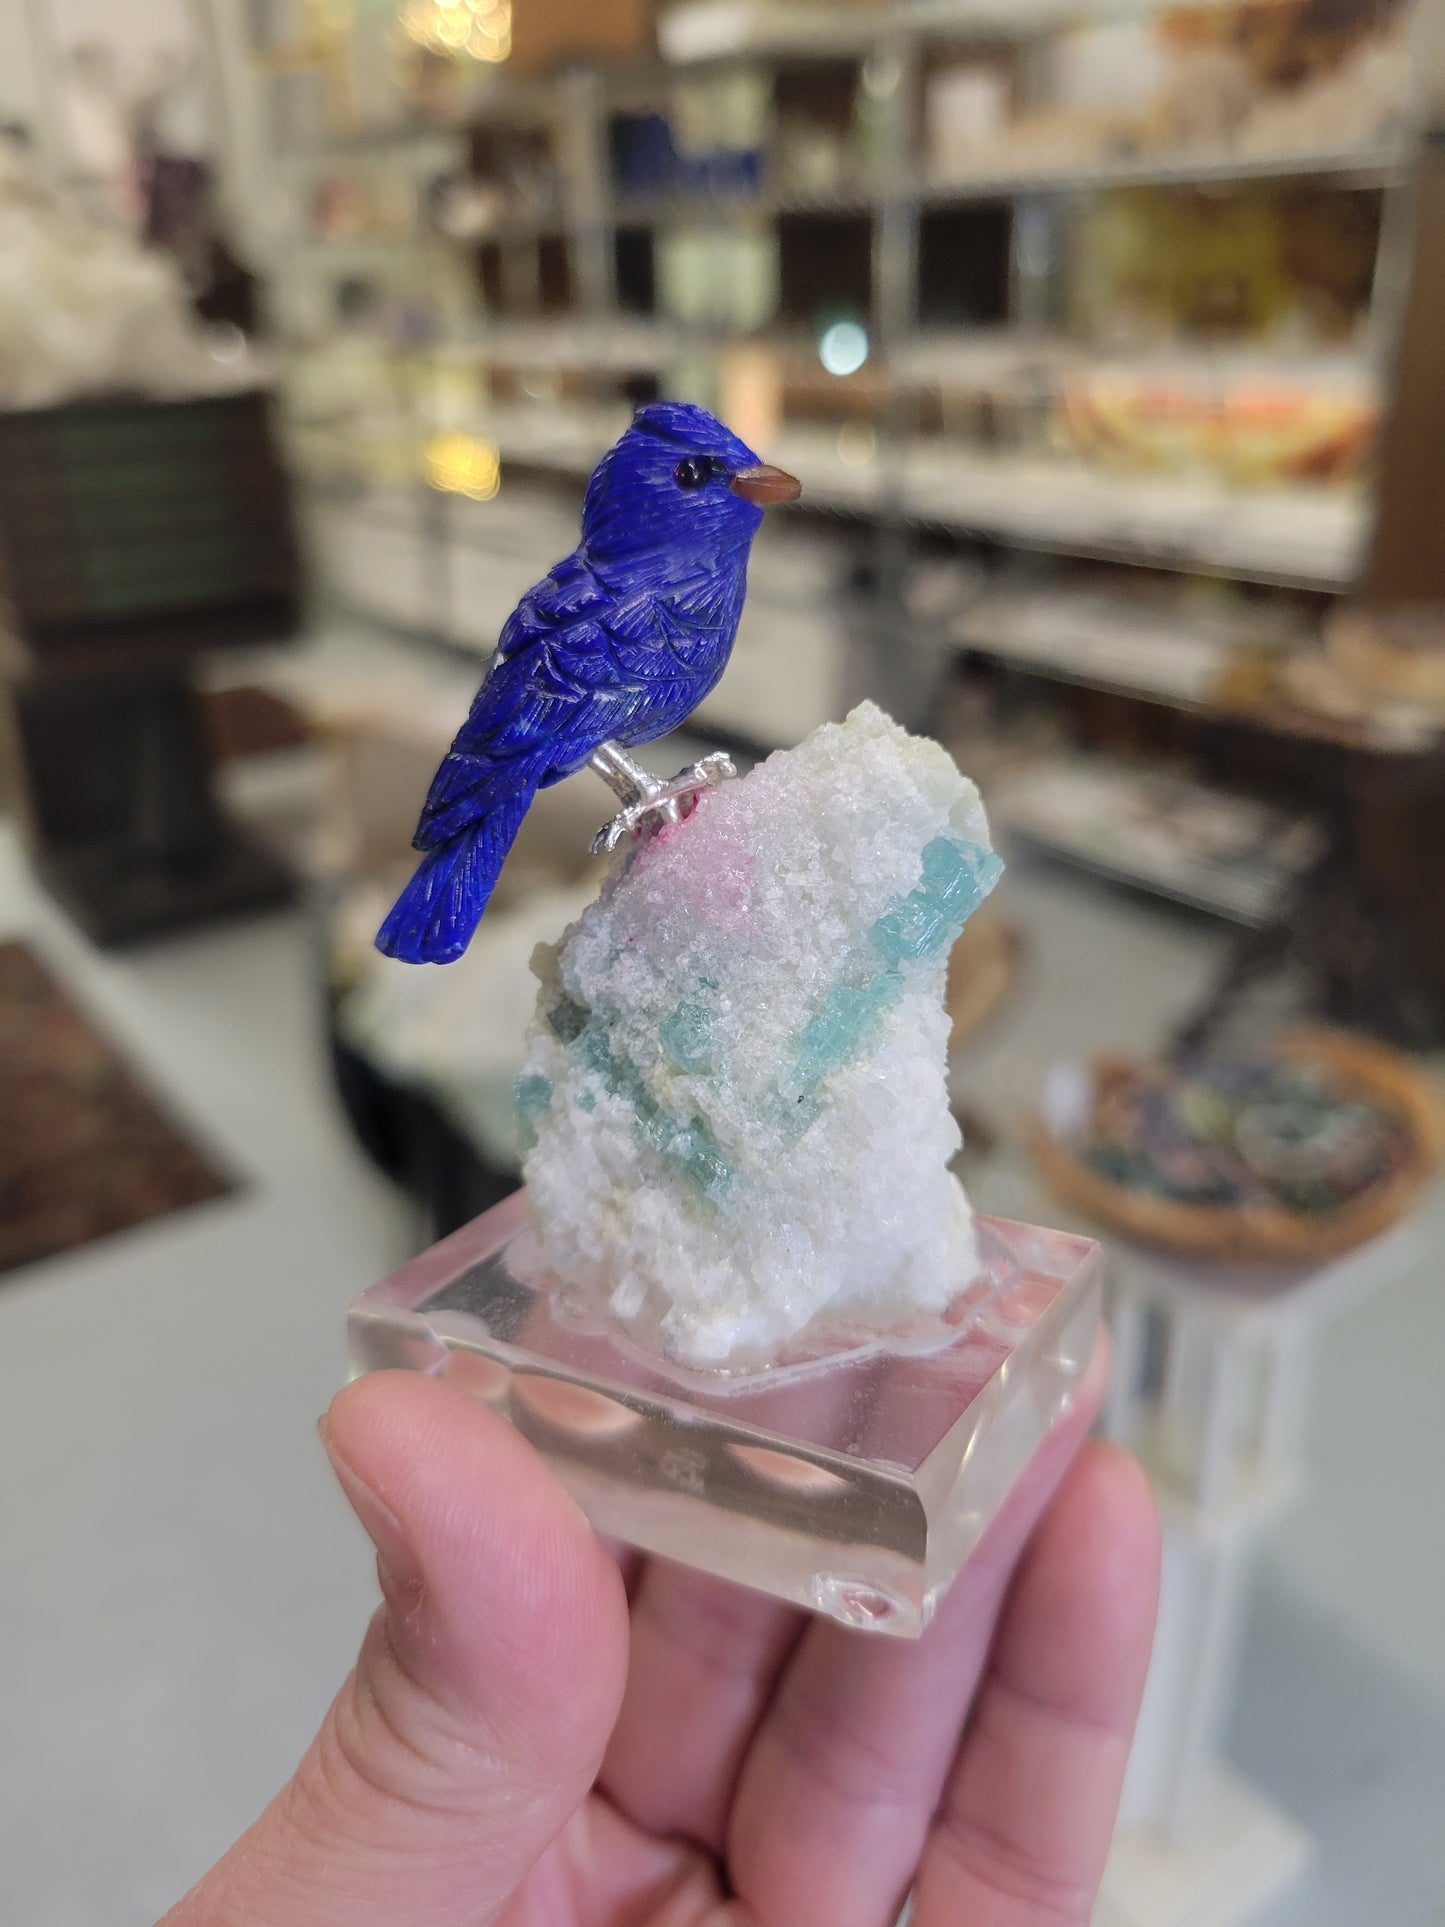 Peter Muller Collection, Lapis Lazuli Bluejay on Aquamarine and Quartz Carved and Polished in Brazil (W 3/4 X 1 3/4 (beak to tail) inches)